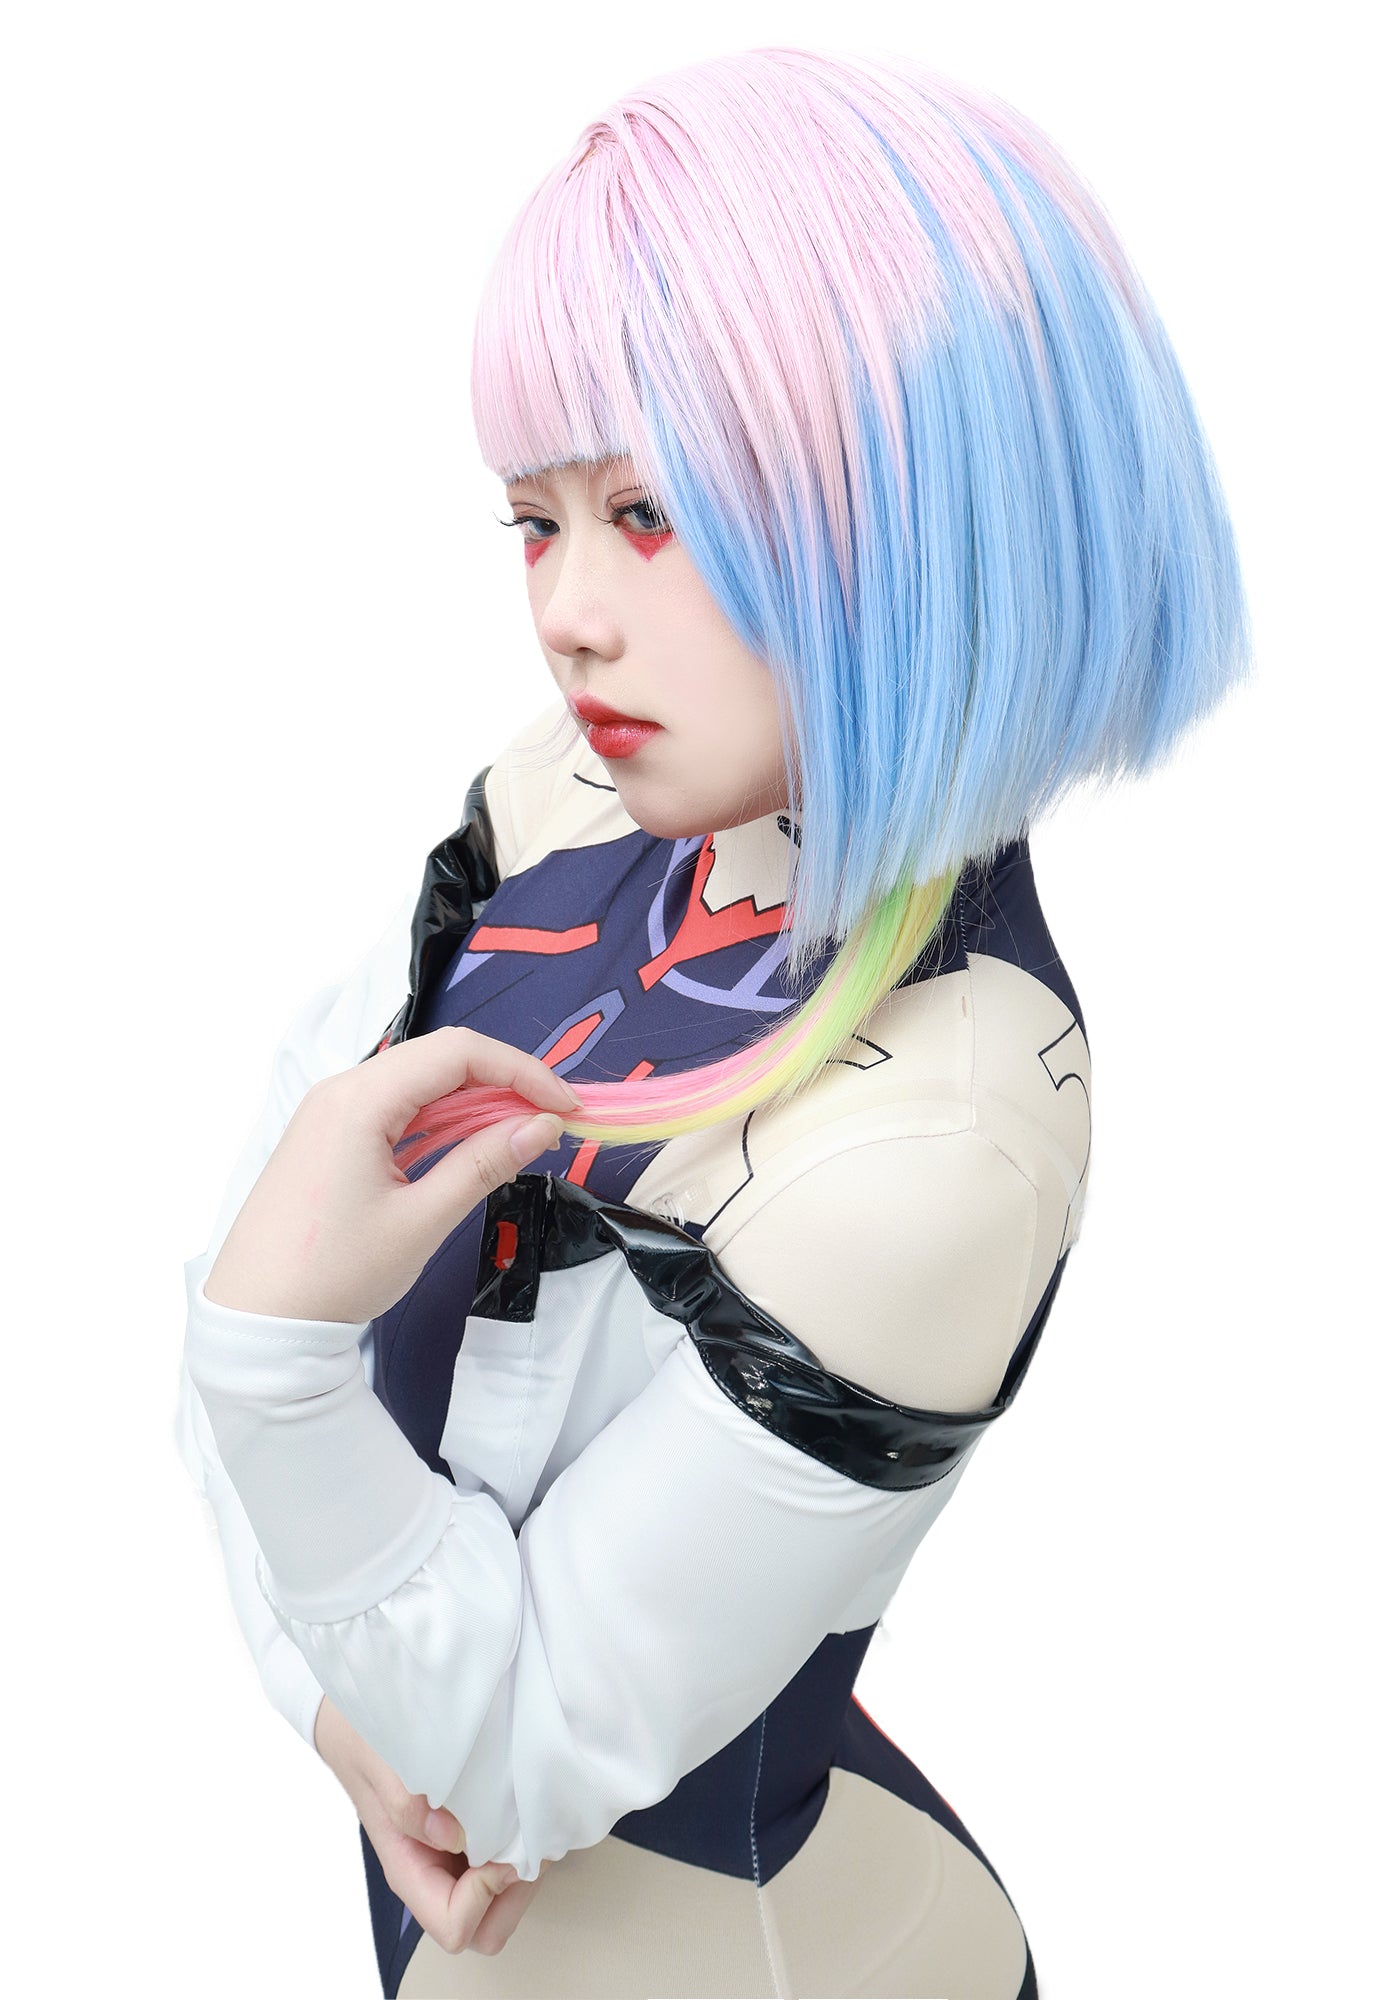 DAZCOS Lucy Cosplay Wig for Women Anime Halloween Costume (Pink-Blue)